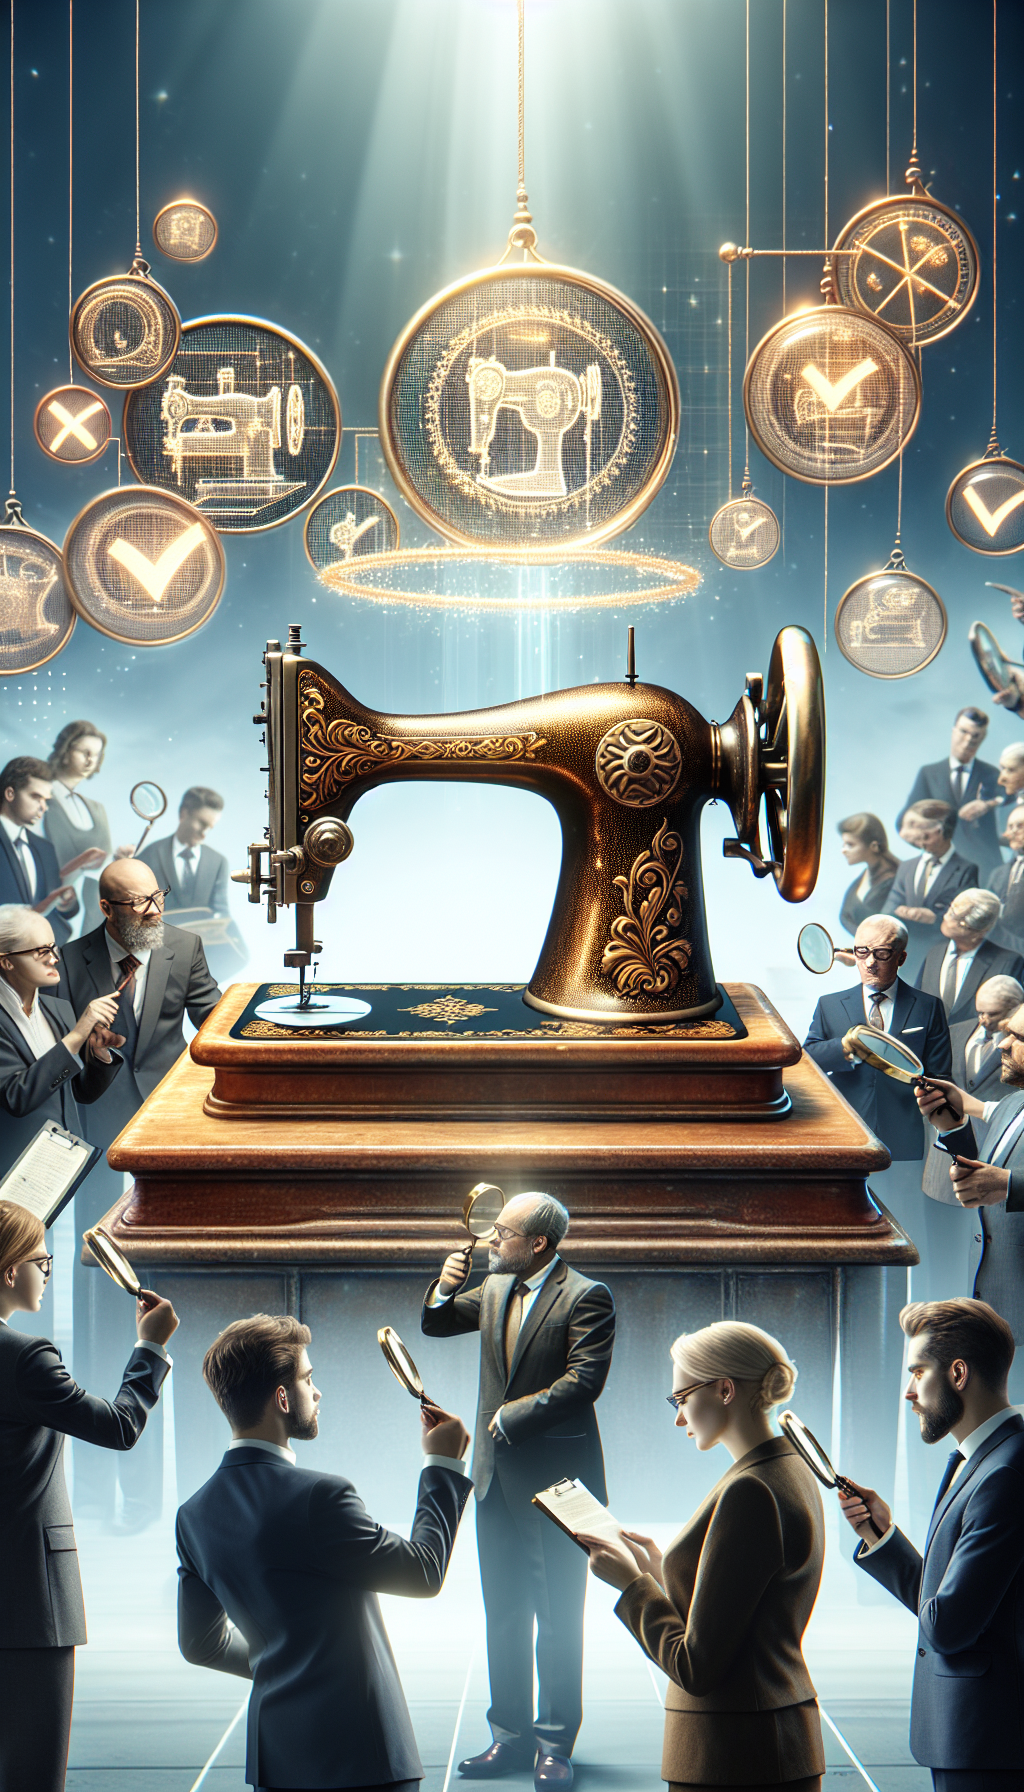 In the foreground, a stylized vintage Singer sewing machine, its intricate scrollwork casting a golden glow, sits atop an auction block, encircled by discerning collectors peering through magnifying glasses. Behind, a ghosted checklist floats, highlighting key features — condition, rarity, model. Each tick on the list sends a shimmer of increased value along the machine's antique form, emphasizing its worth.